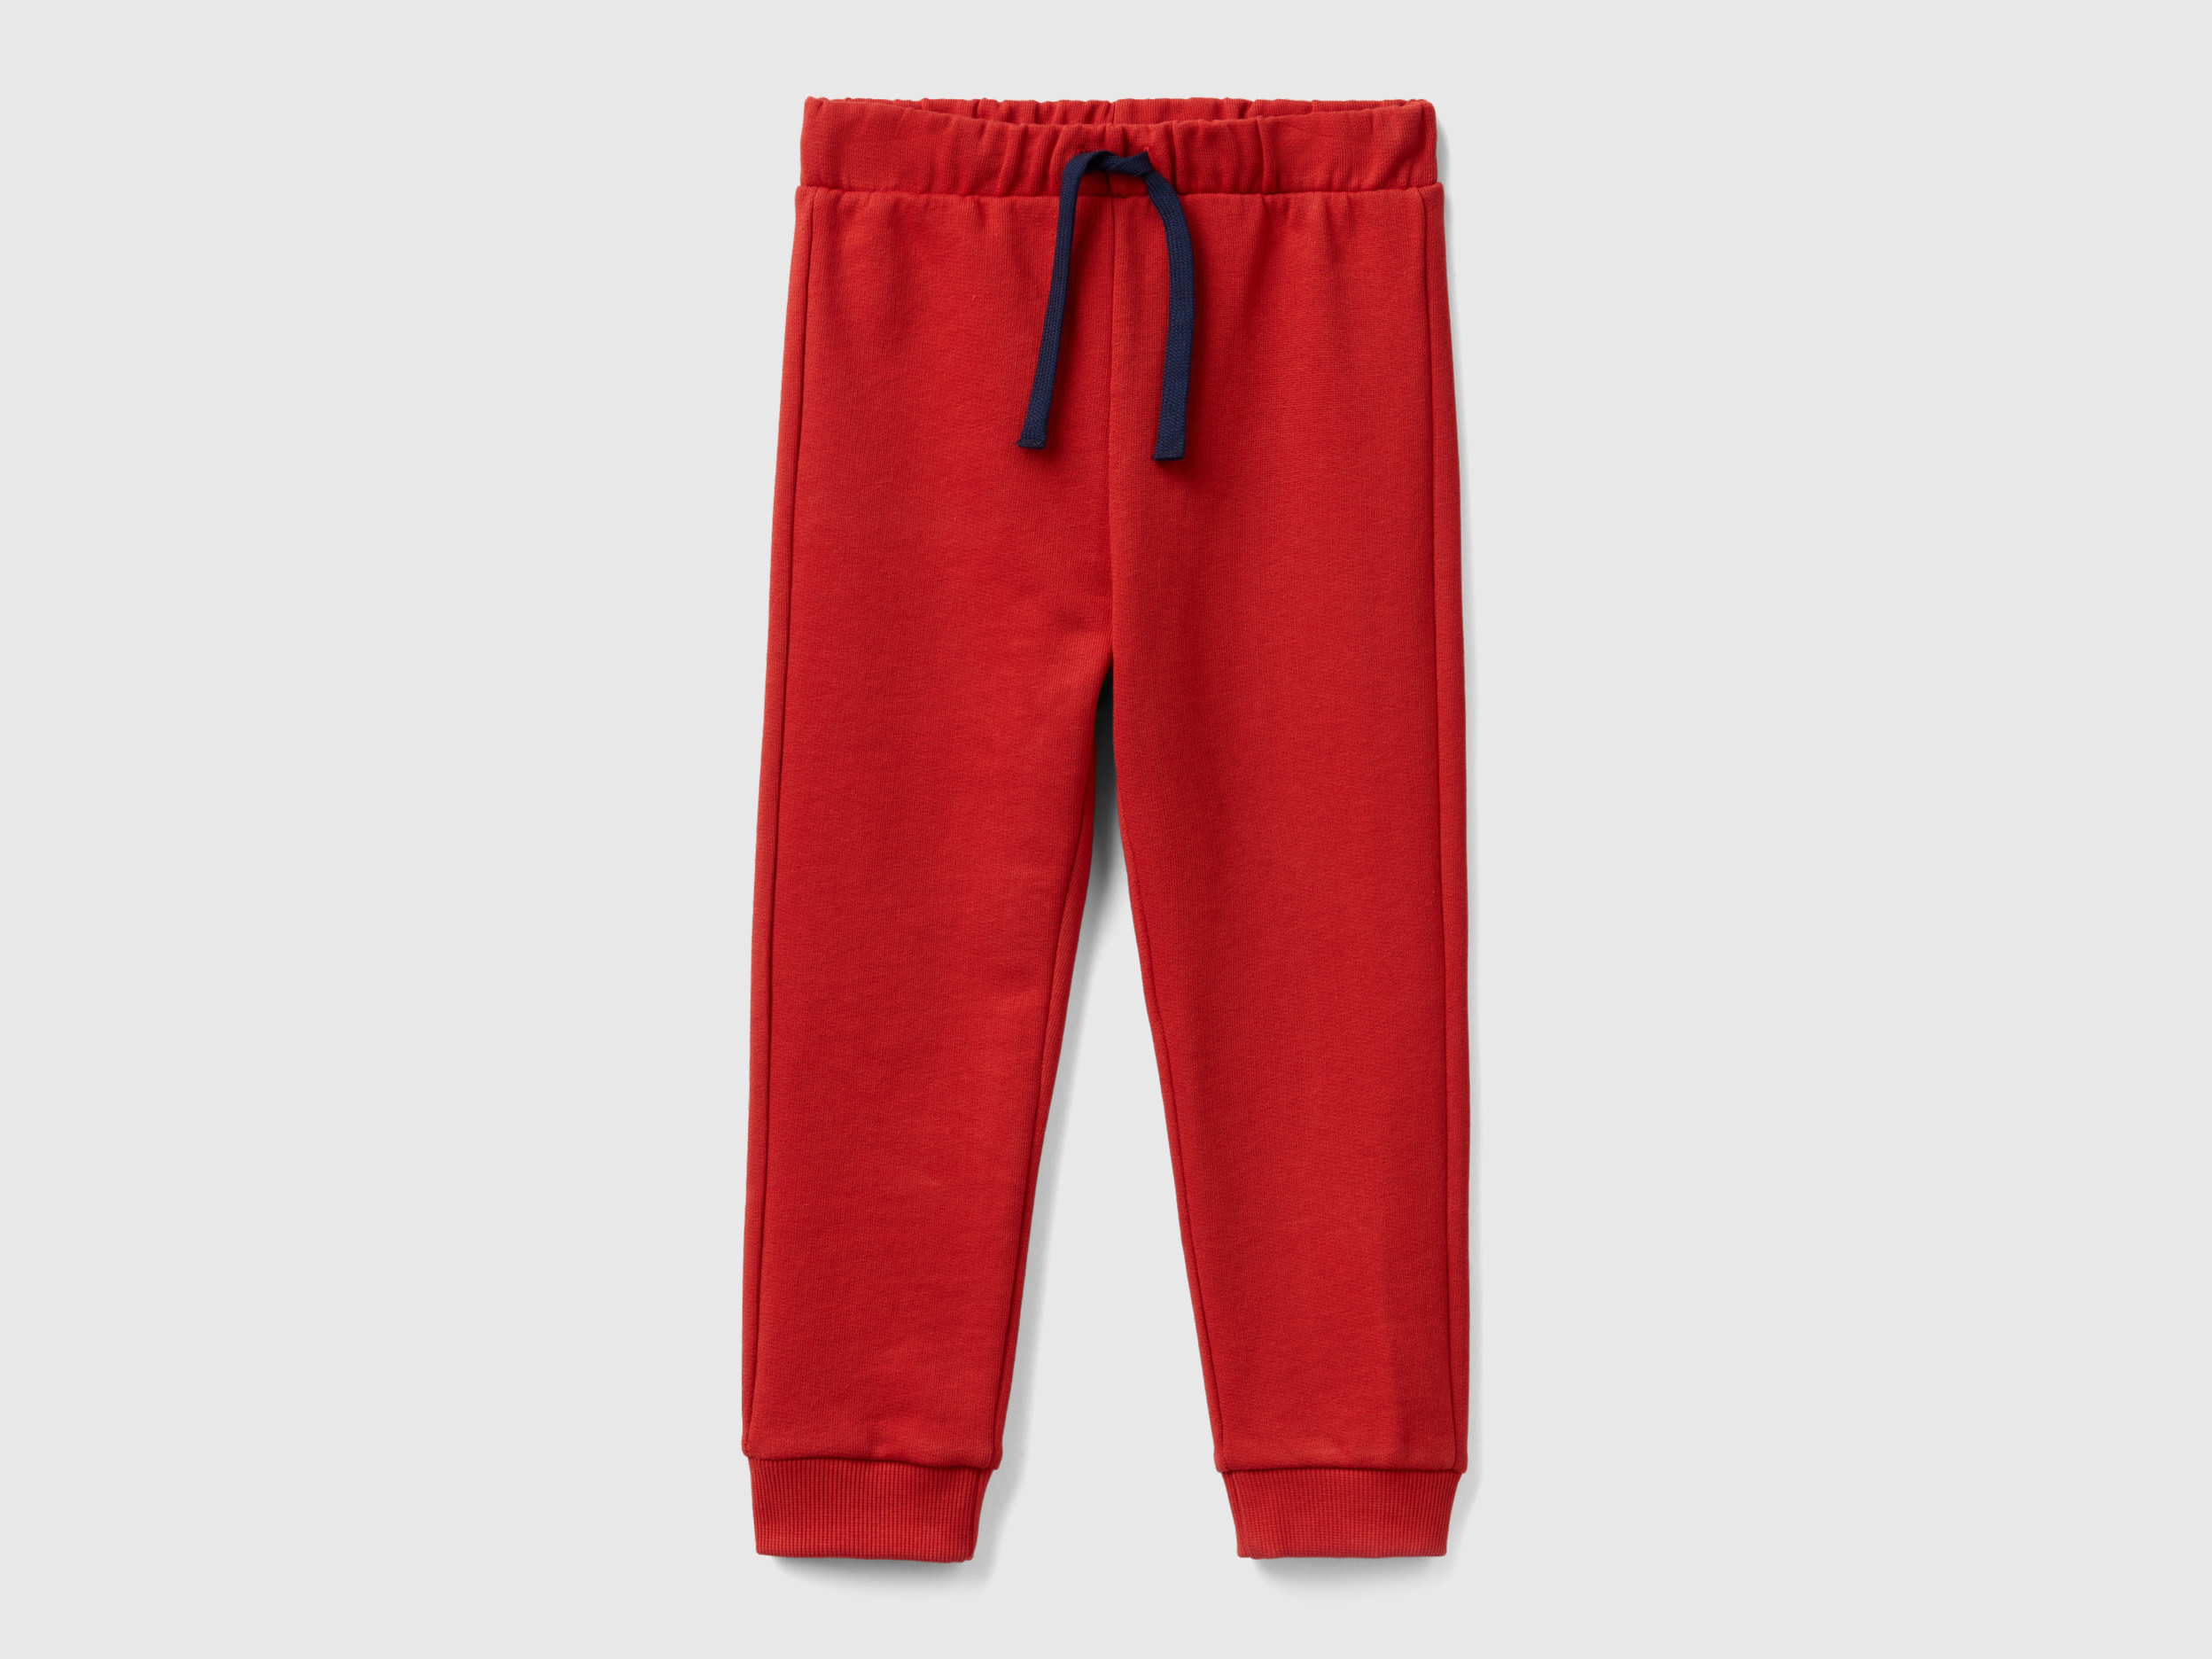 Image of Benetton, Sweatpants With Pocket, size 82, Brick Red, Kids